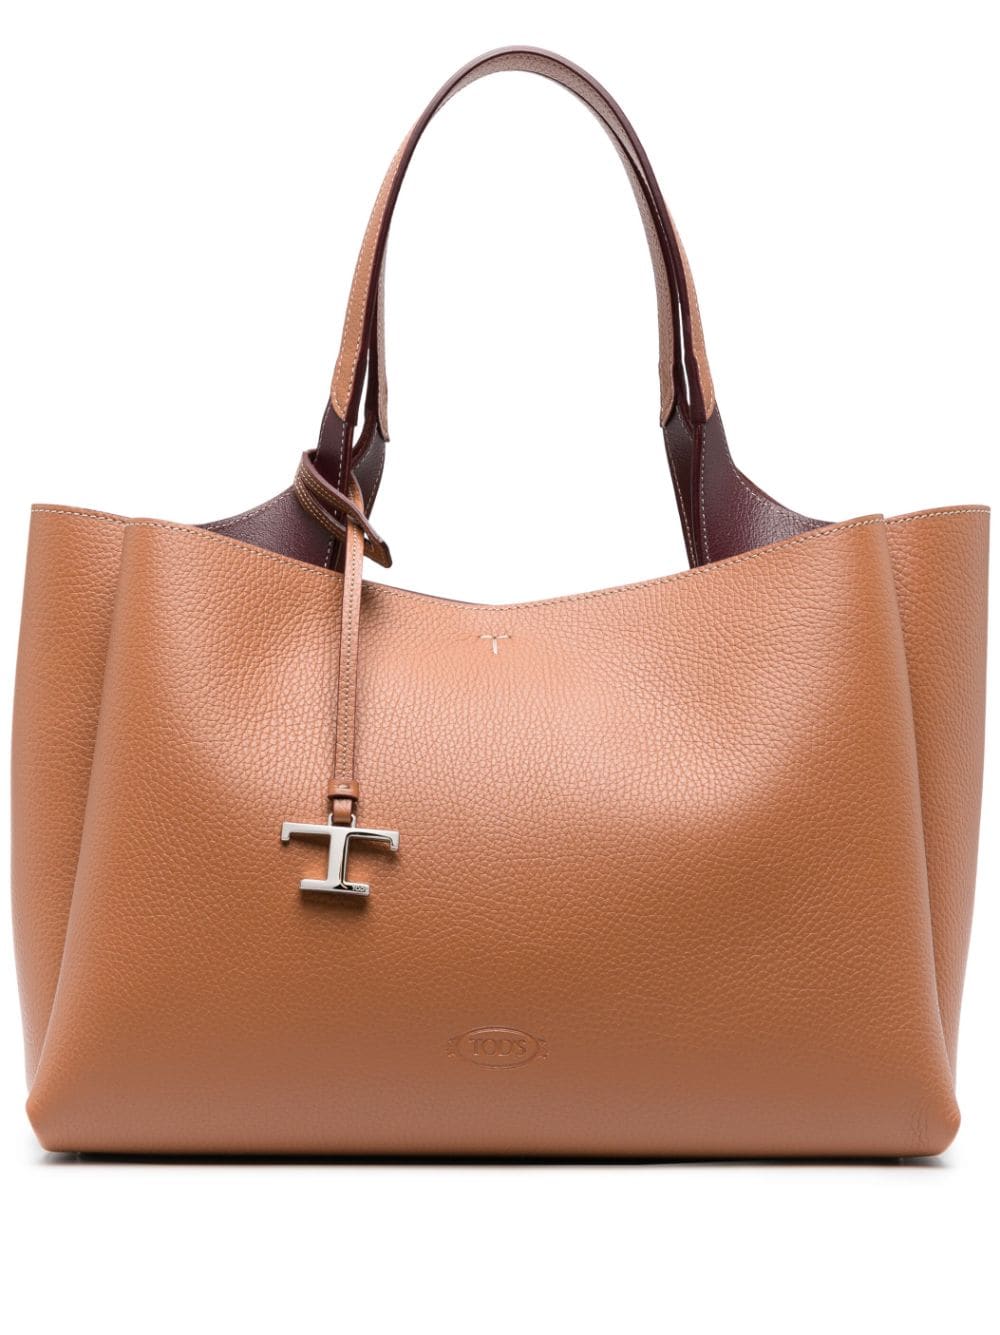 Timeless Calf Leather Tote Handbag in Brown by TOD'S